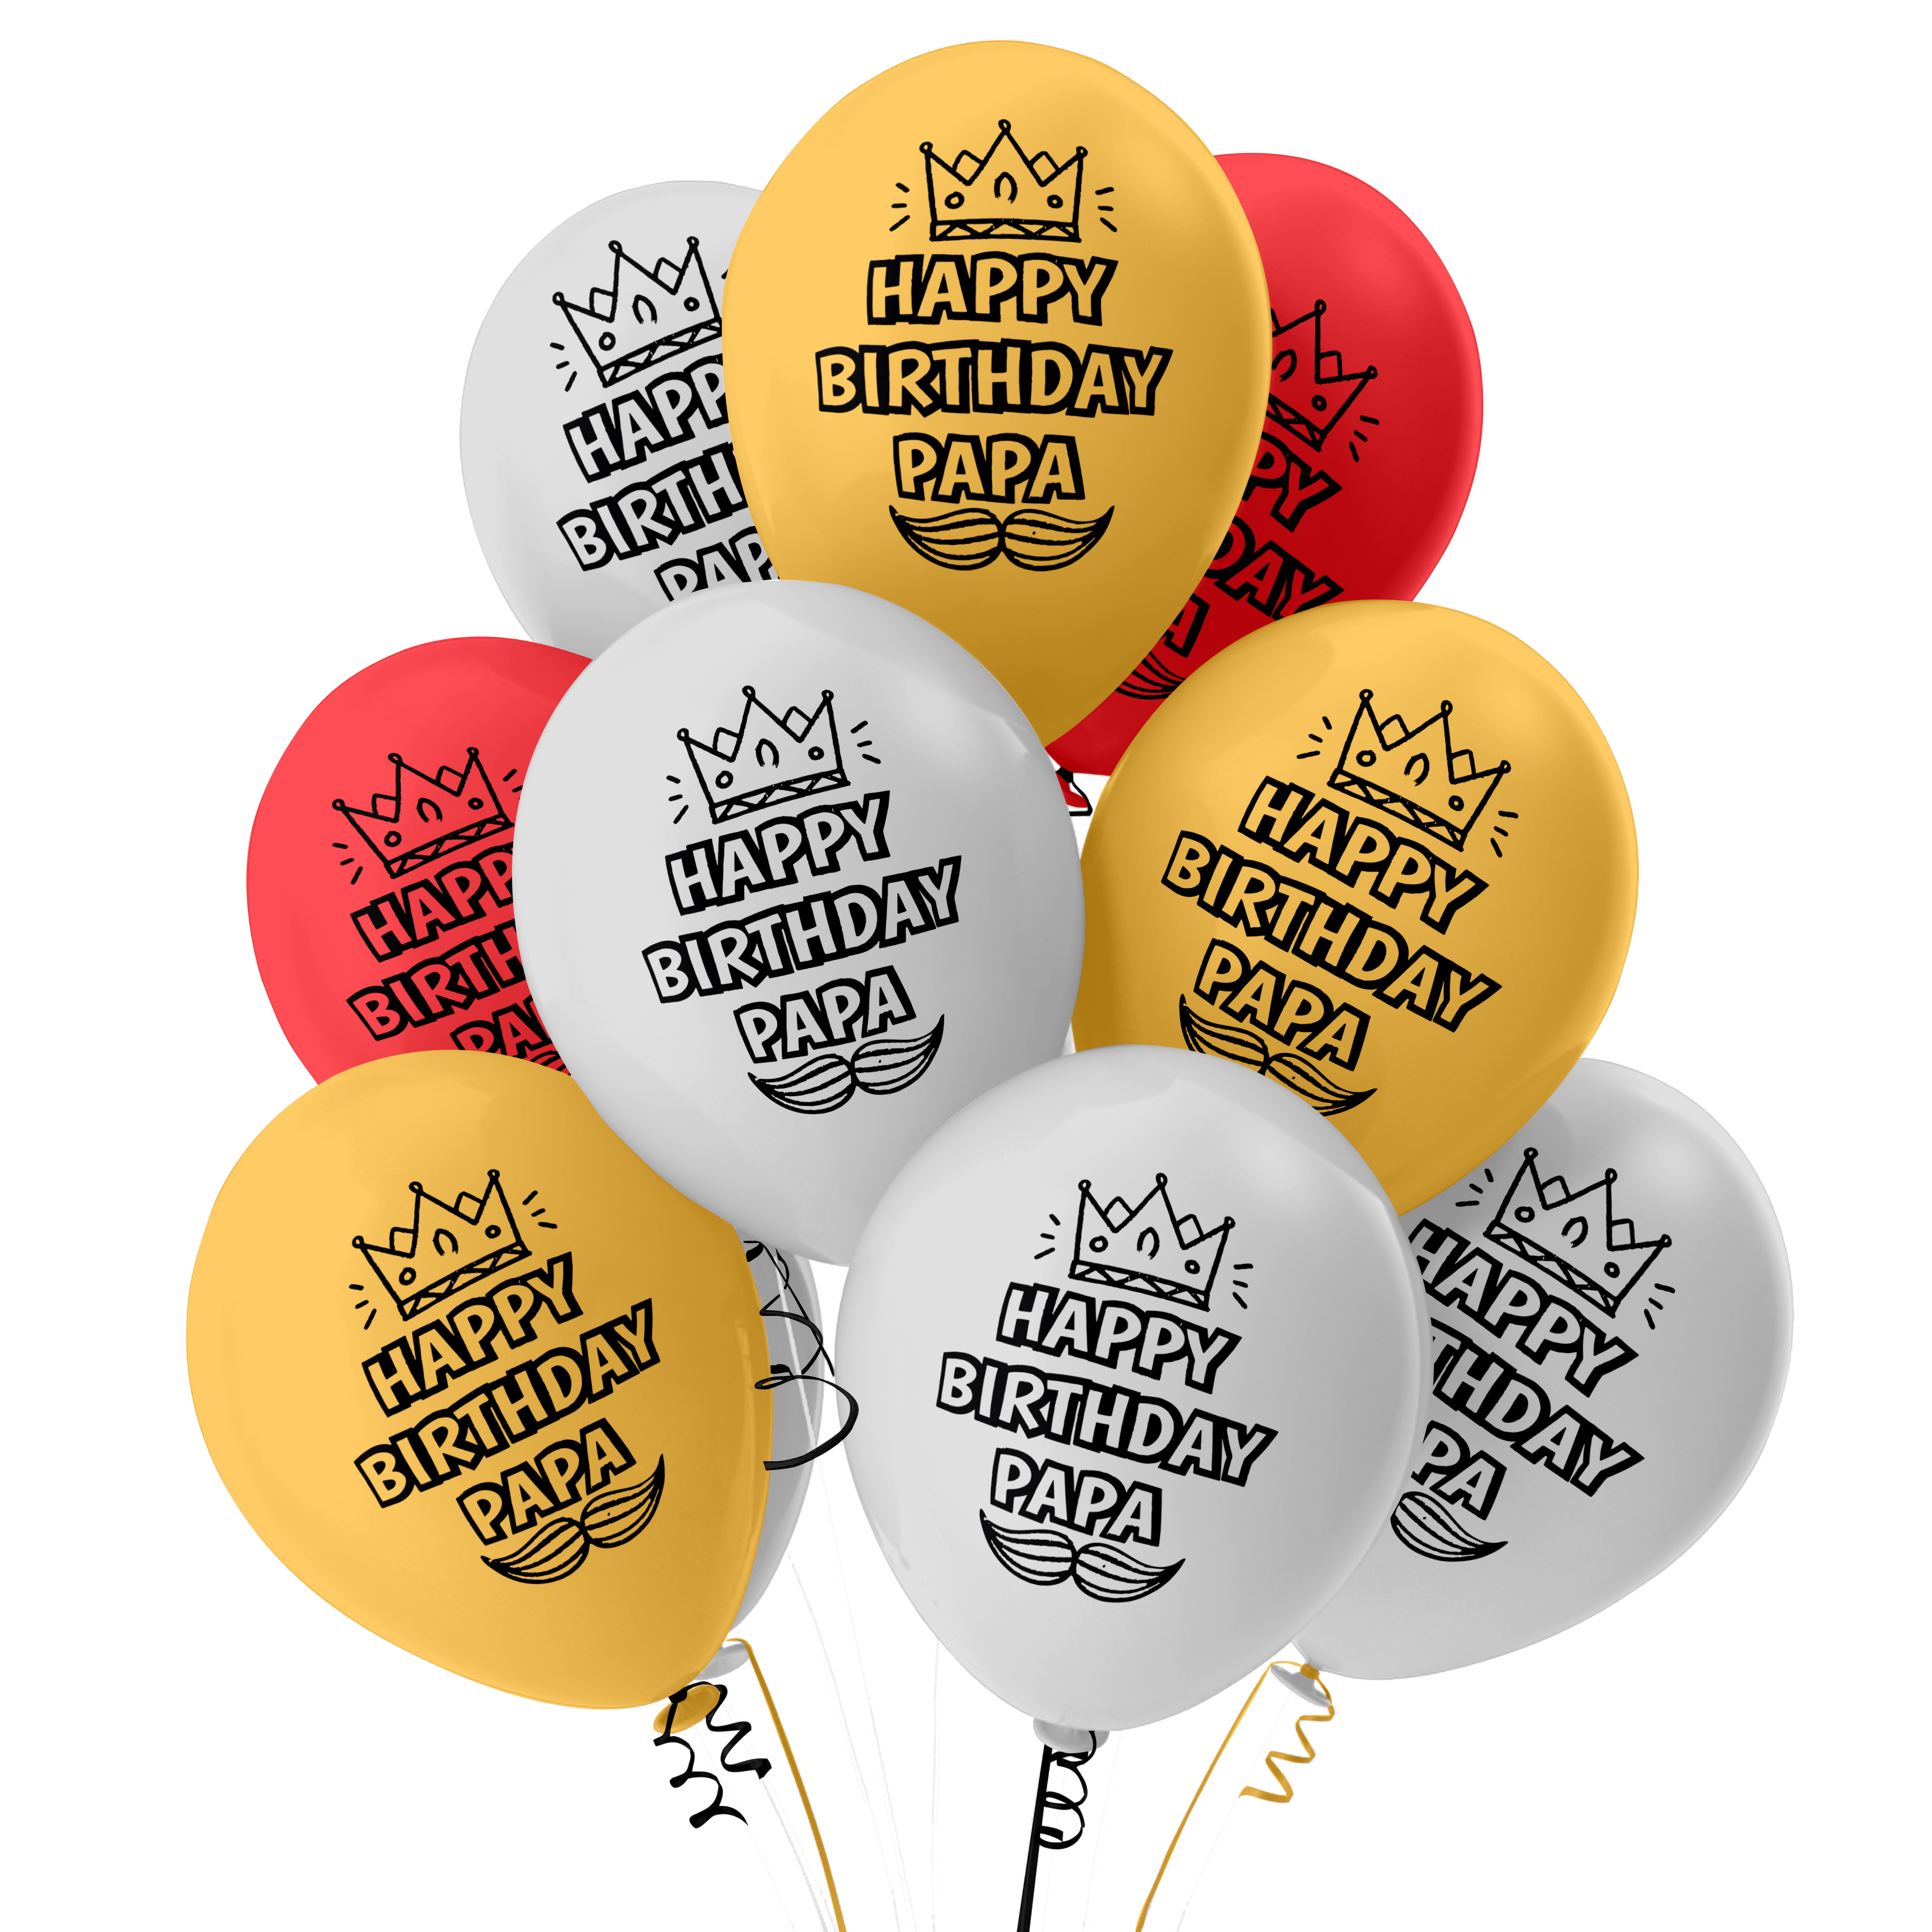 The Magic Balloons Store- Surprise Your Dad with a Memorable Birthday Celebration with Happy Birthday Dad Balloons in Gold, Red, and Silver - Perfect for Men's Birthday Party Supplies